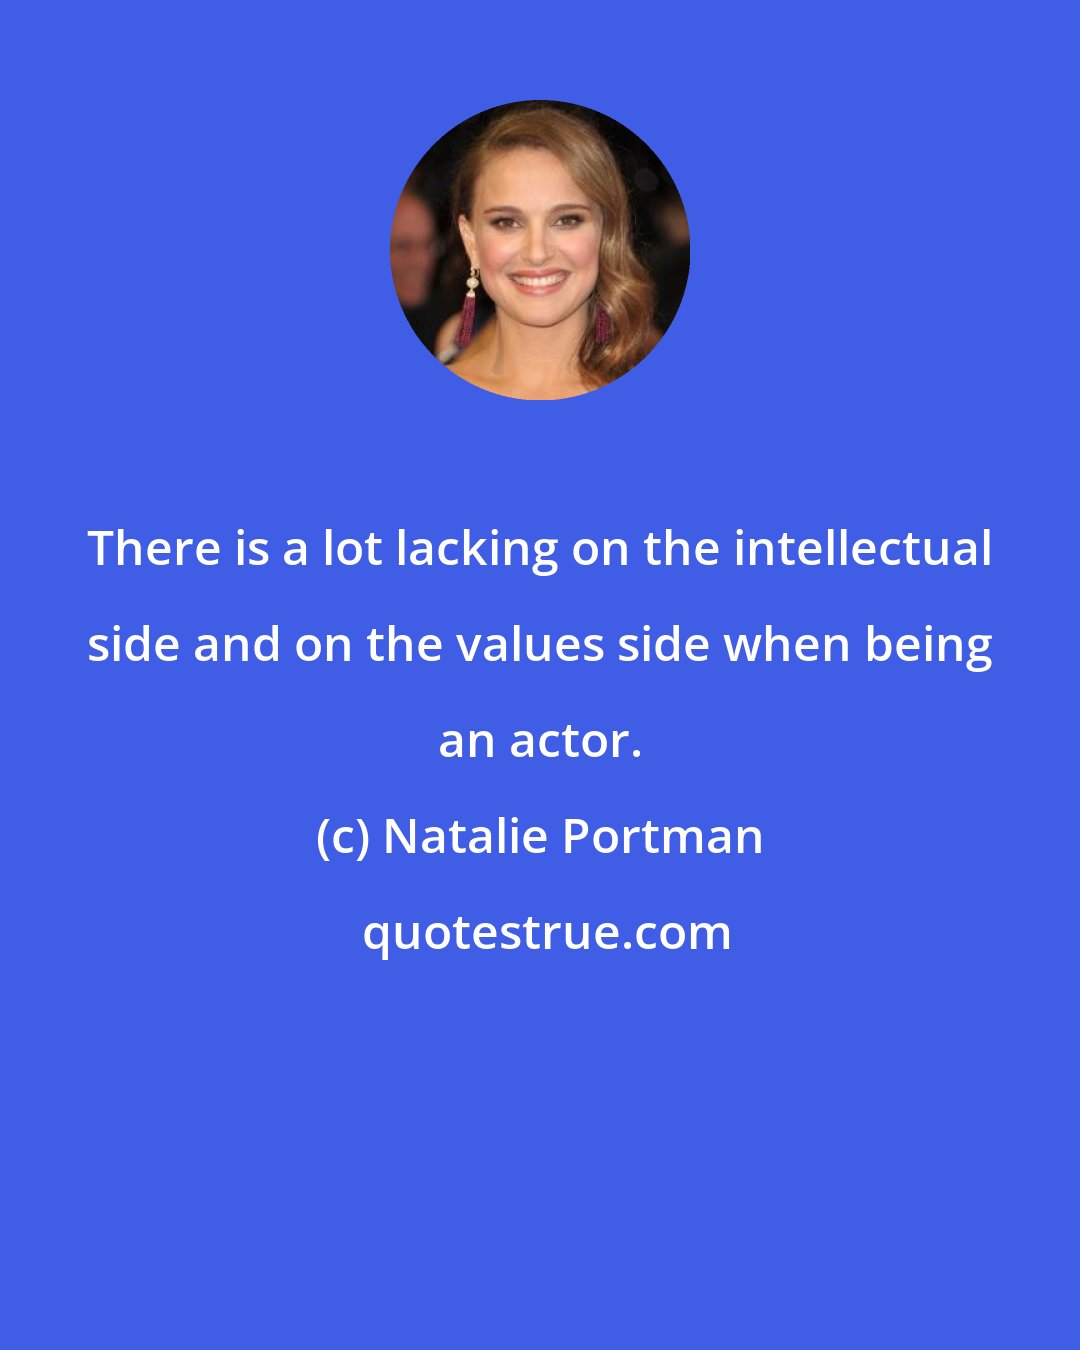 Natalie Portman: There is a lot lacking on the intellectual side and on the values side when being an actor.